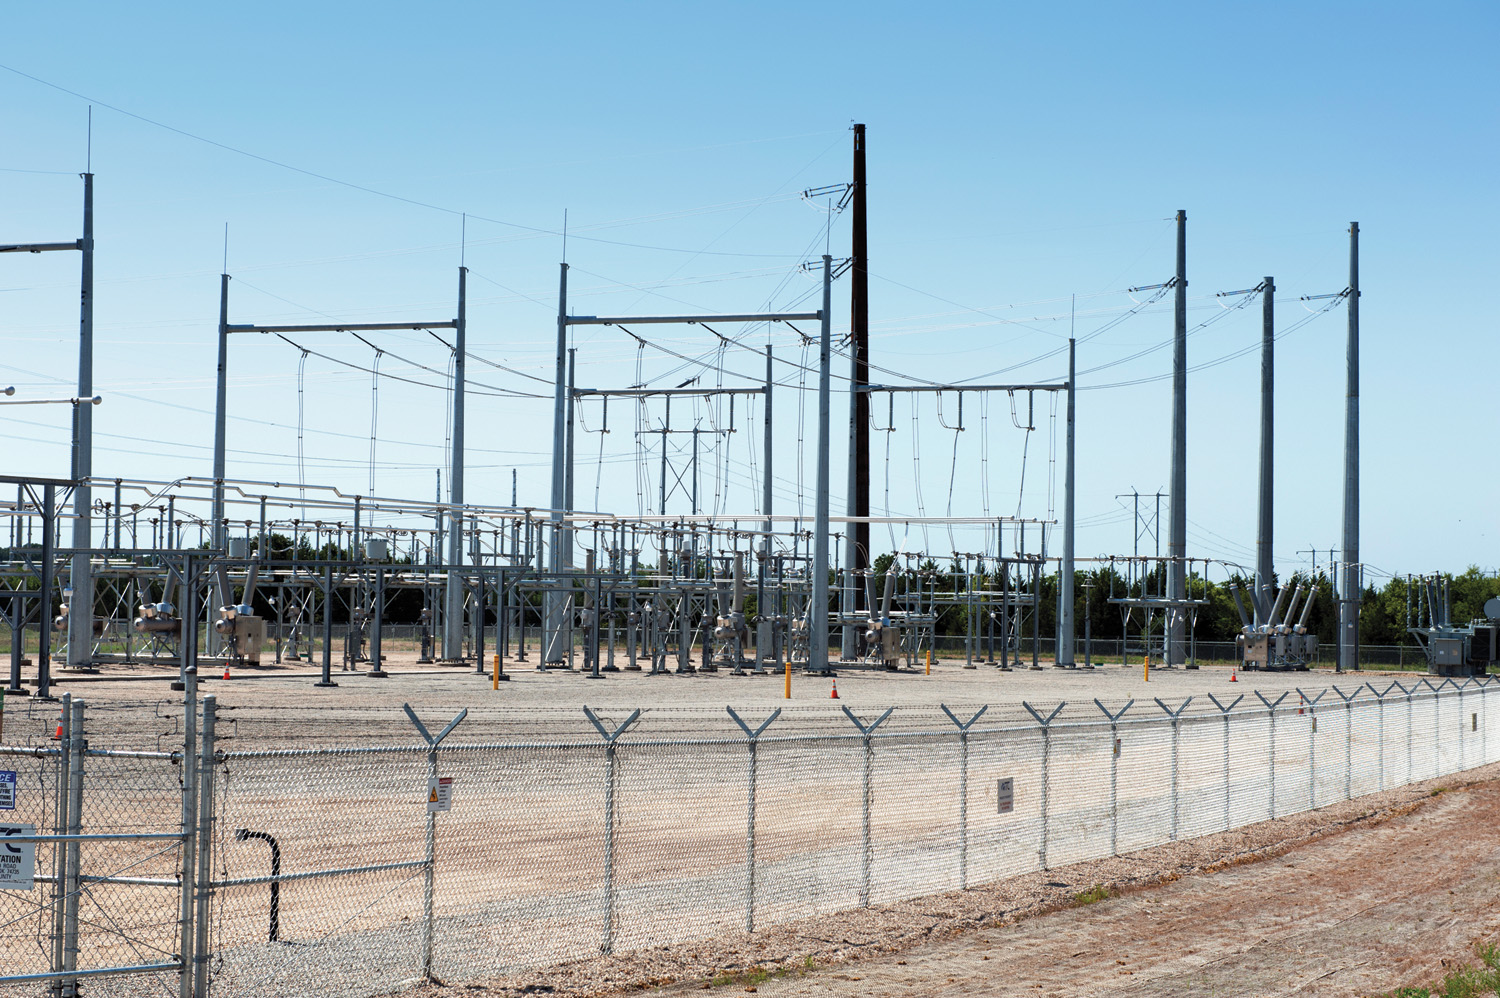 ITC Great Plains commissioned the Hugo-Valliant HVDC transmission line and substation project in Oklahoma.